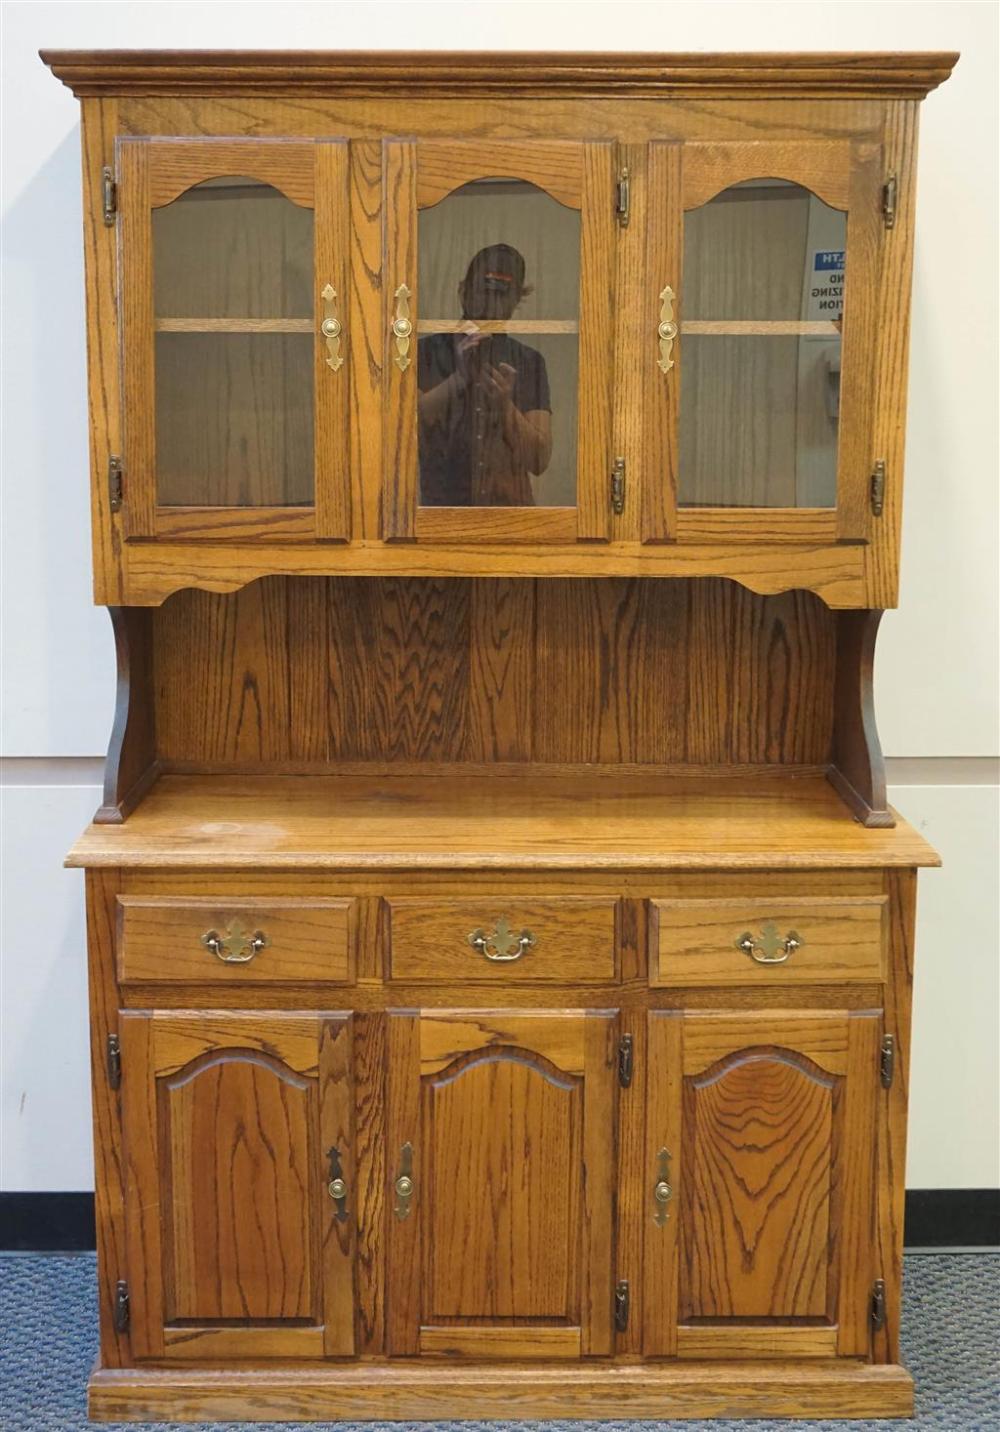 OAK TWO-PART CHINA CABINET, H: 75-1/2,